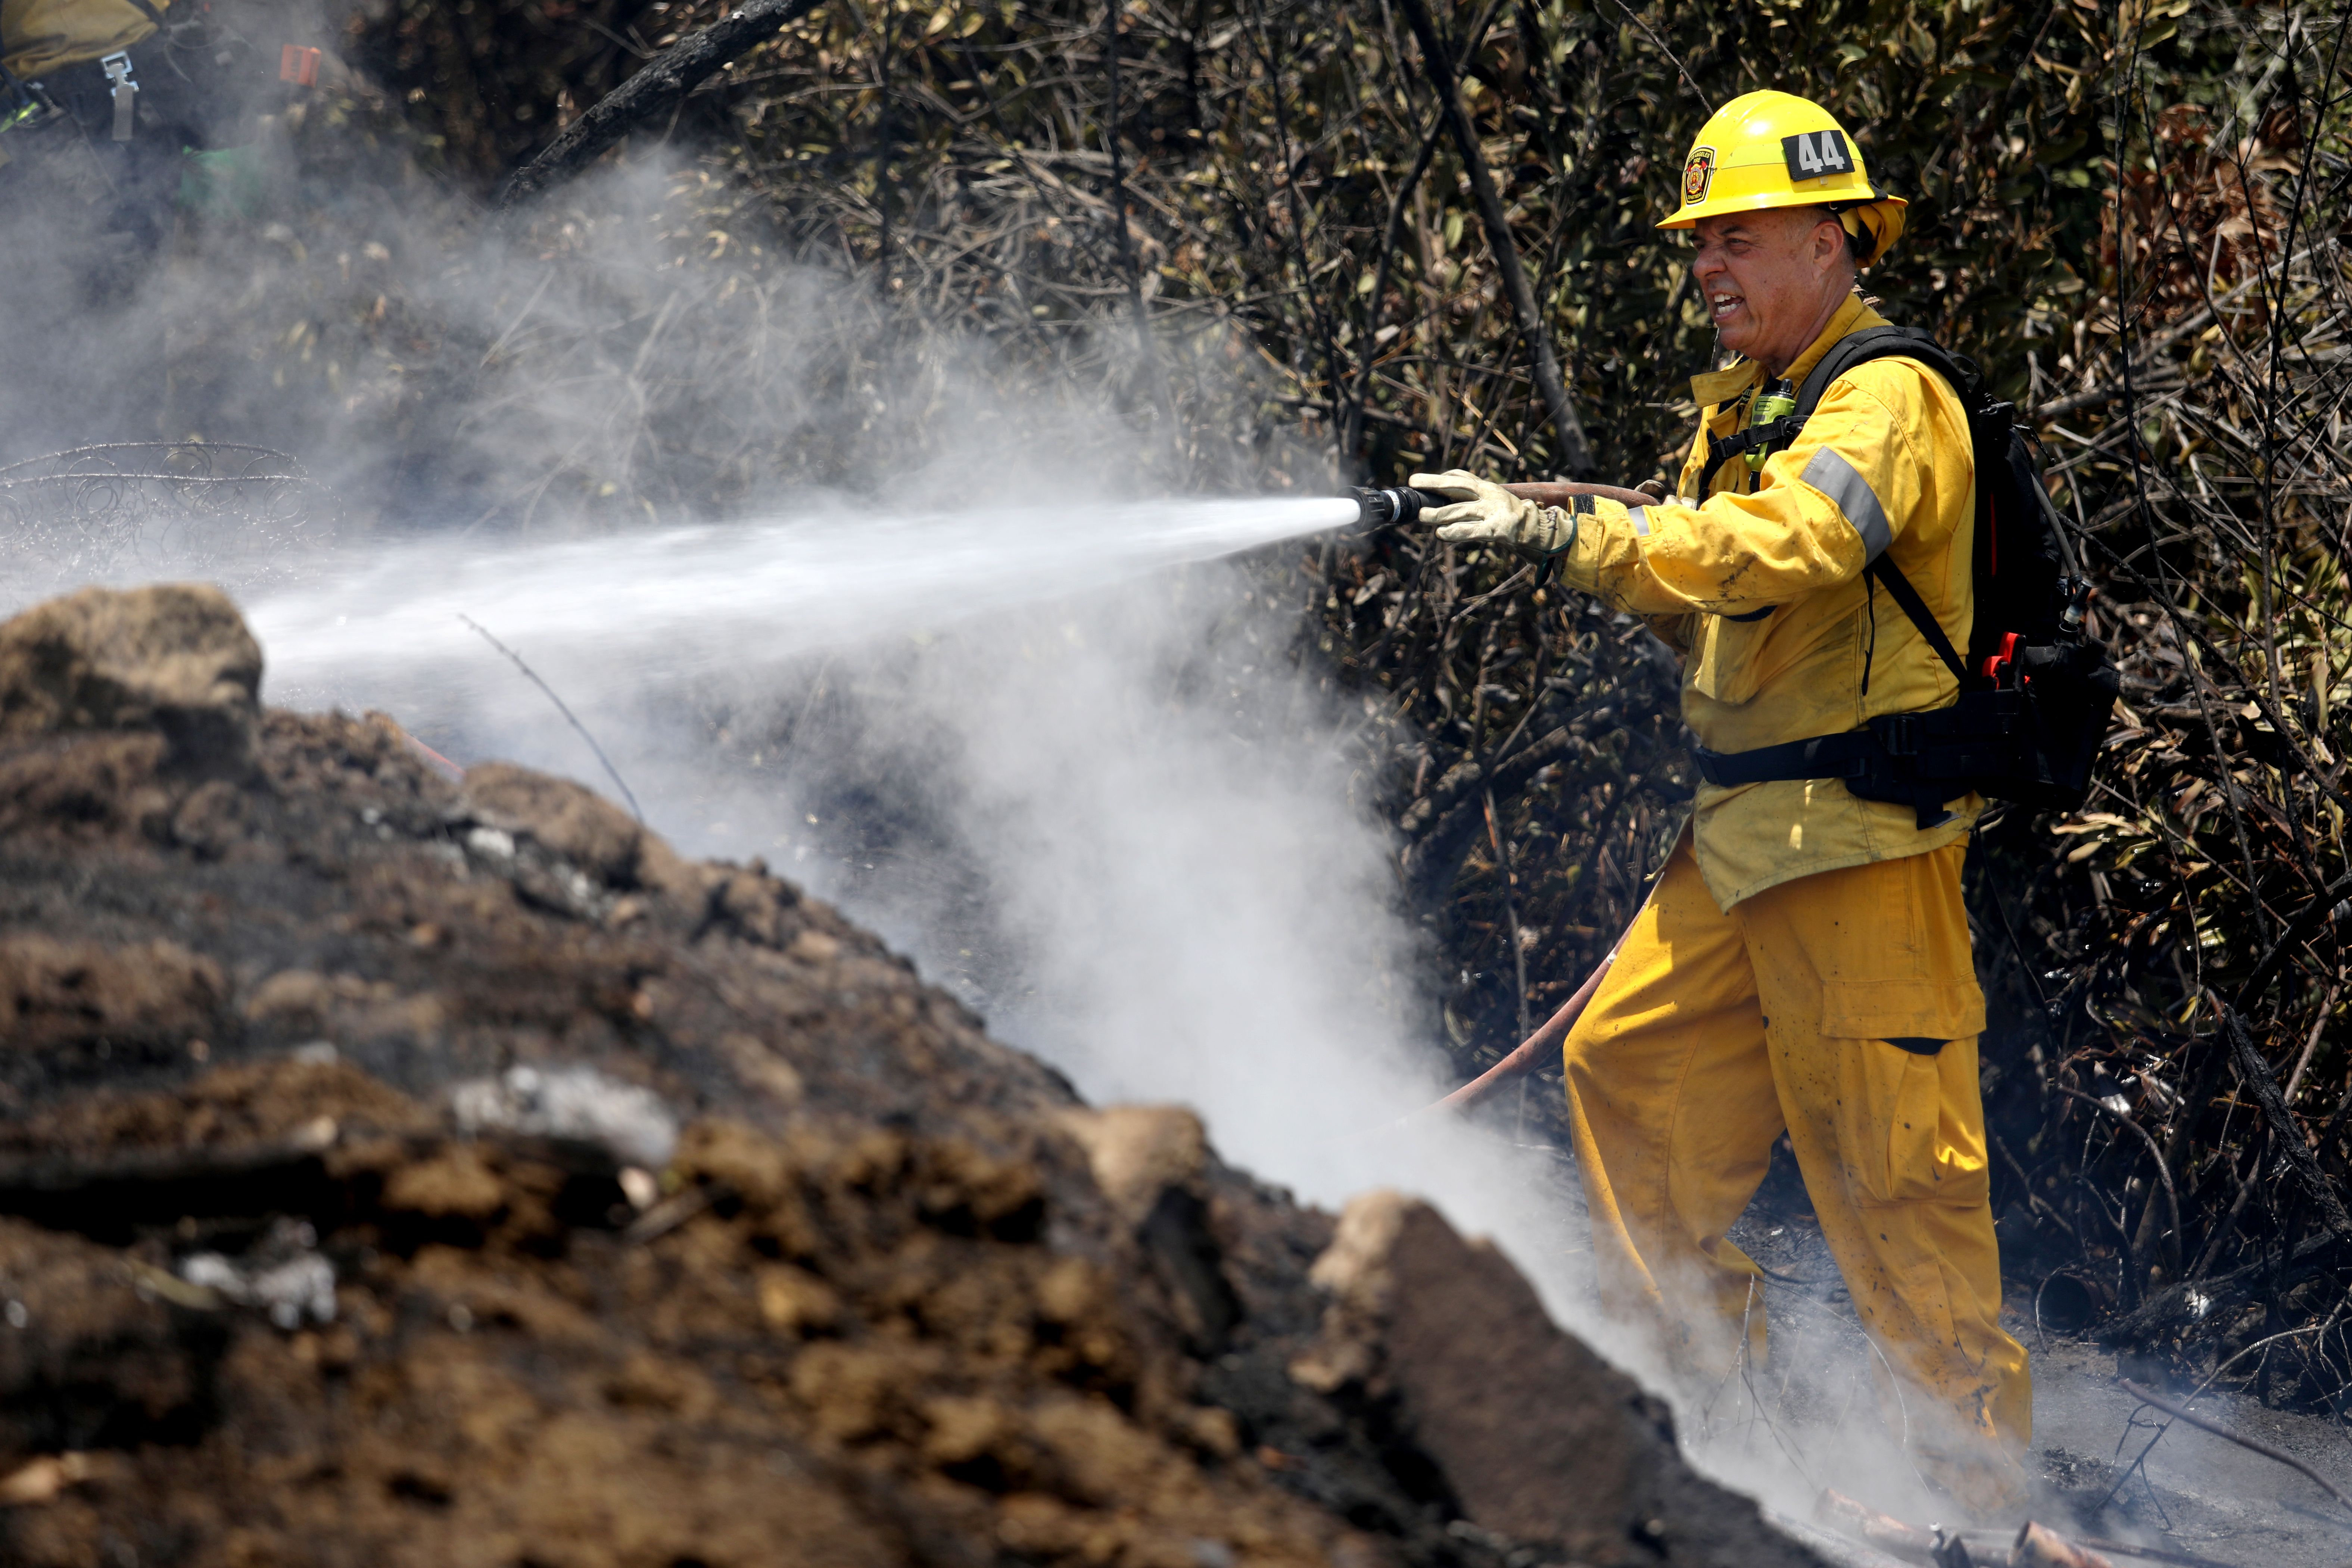 A firefighter responds to a brush fire in Los Angeles on June 16